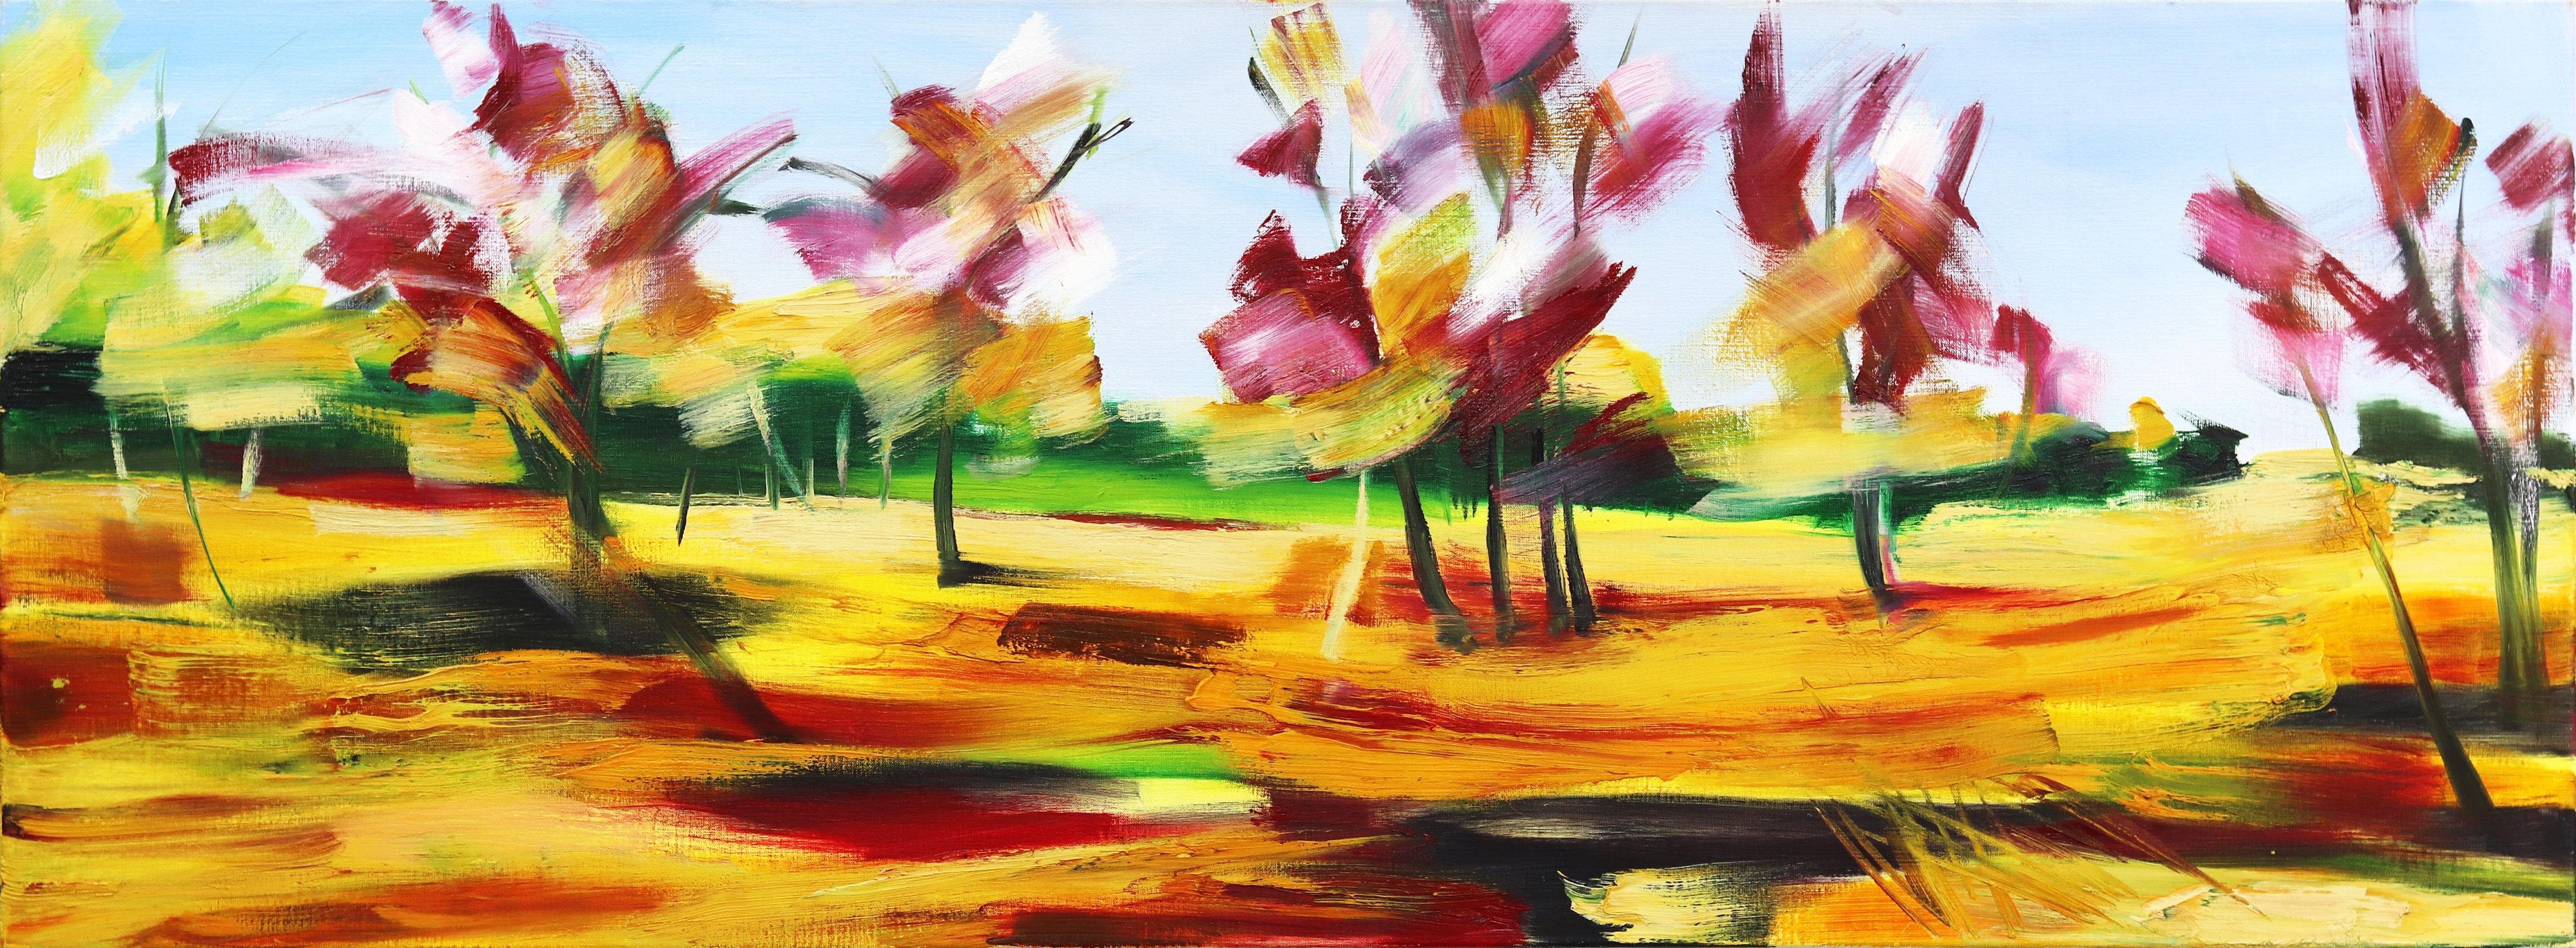 Bettina Mauel Landscape Painting - Autumn - Serene Red and Yellow Contemporary Landscape Oil Painting Meadow Field